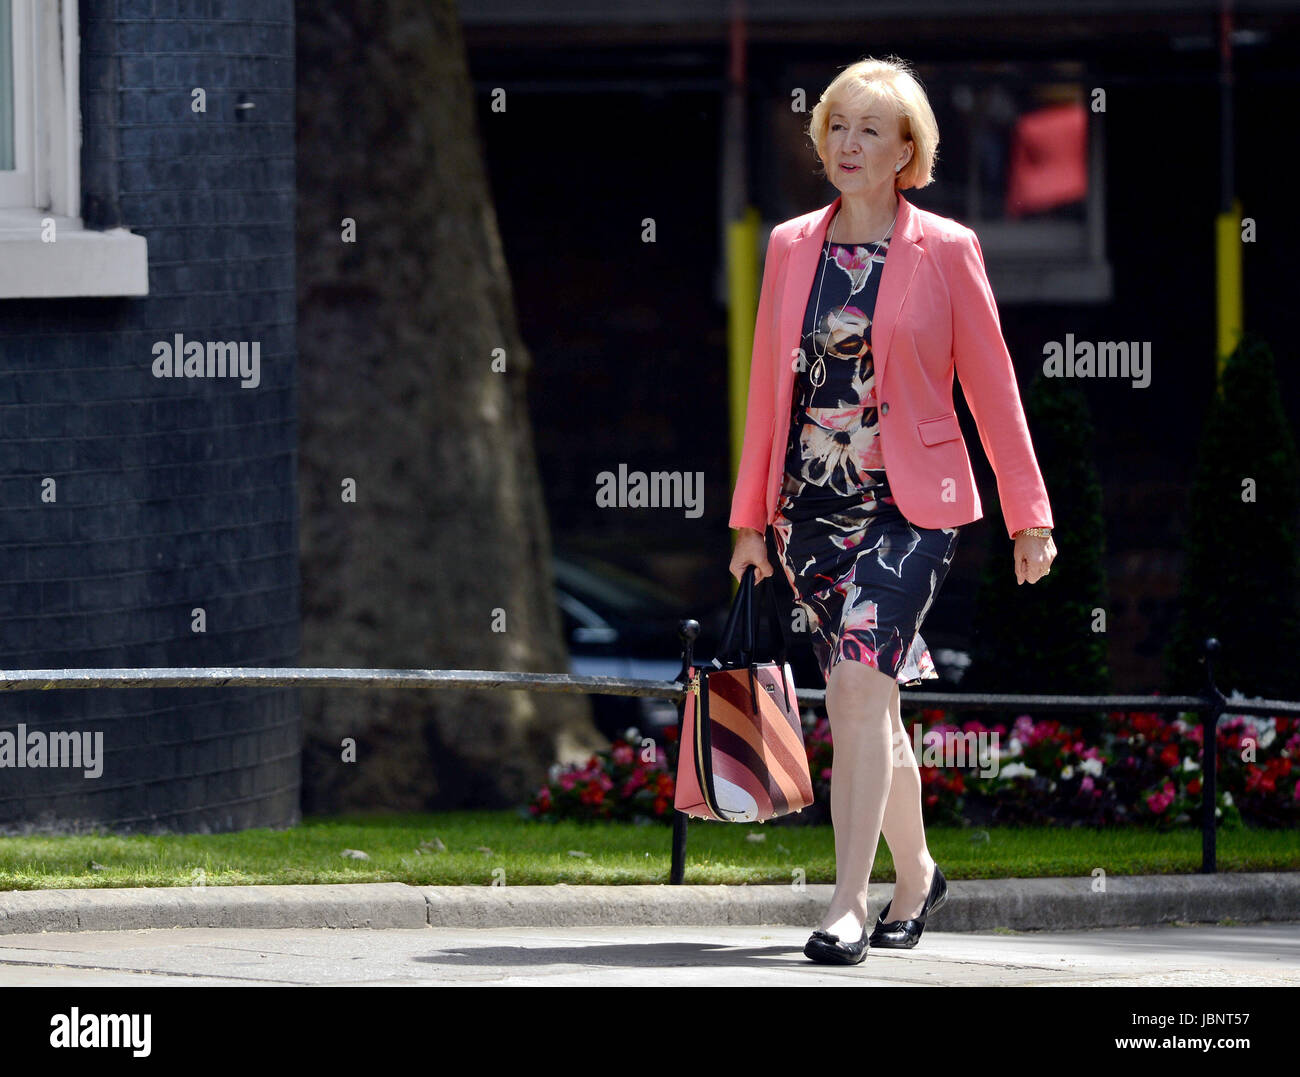 Leader Of The Commons Andrea Leadsom Arrives In Downing Street London As Theresa May Is Facing 